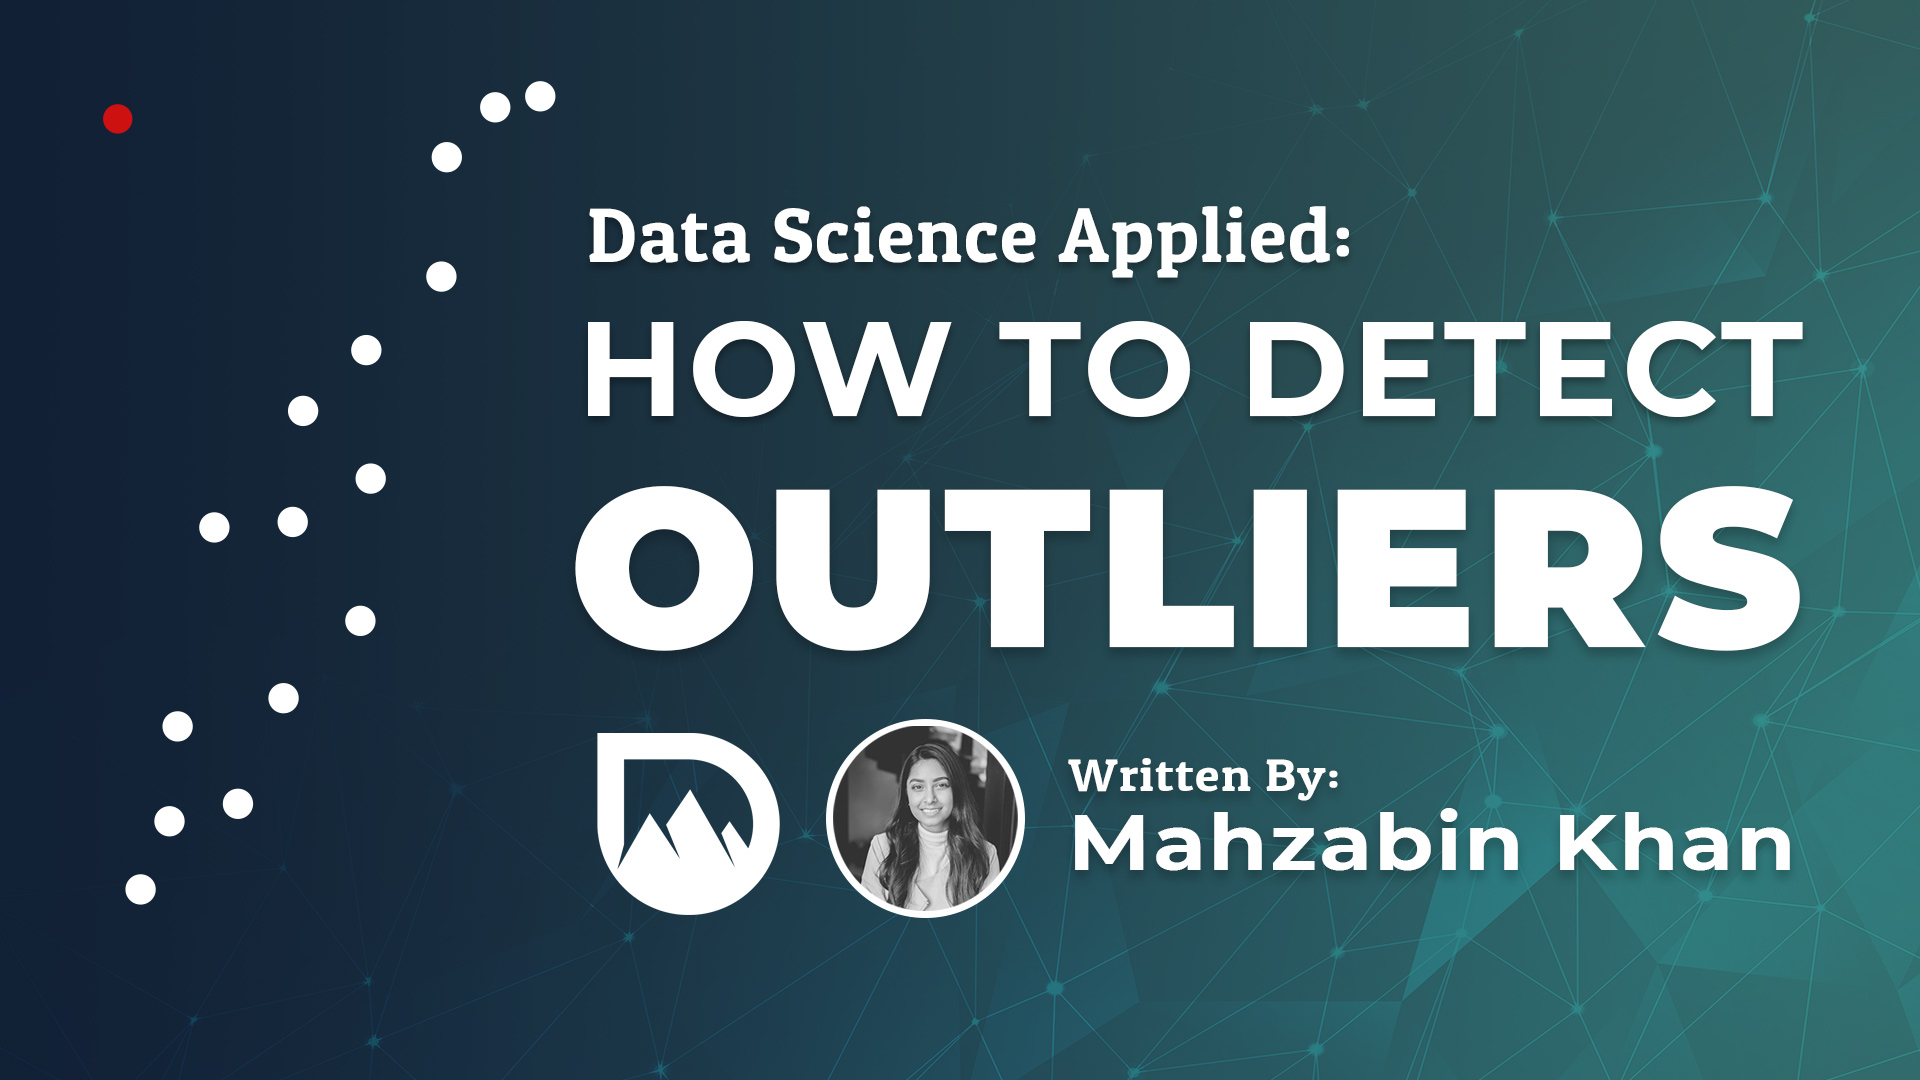 How to Detect Outliers